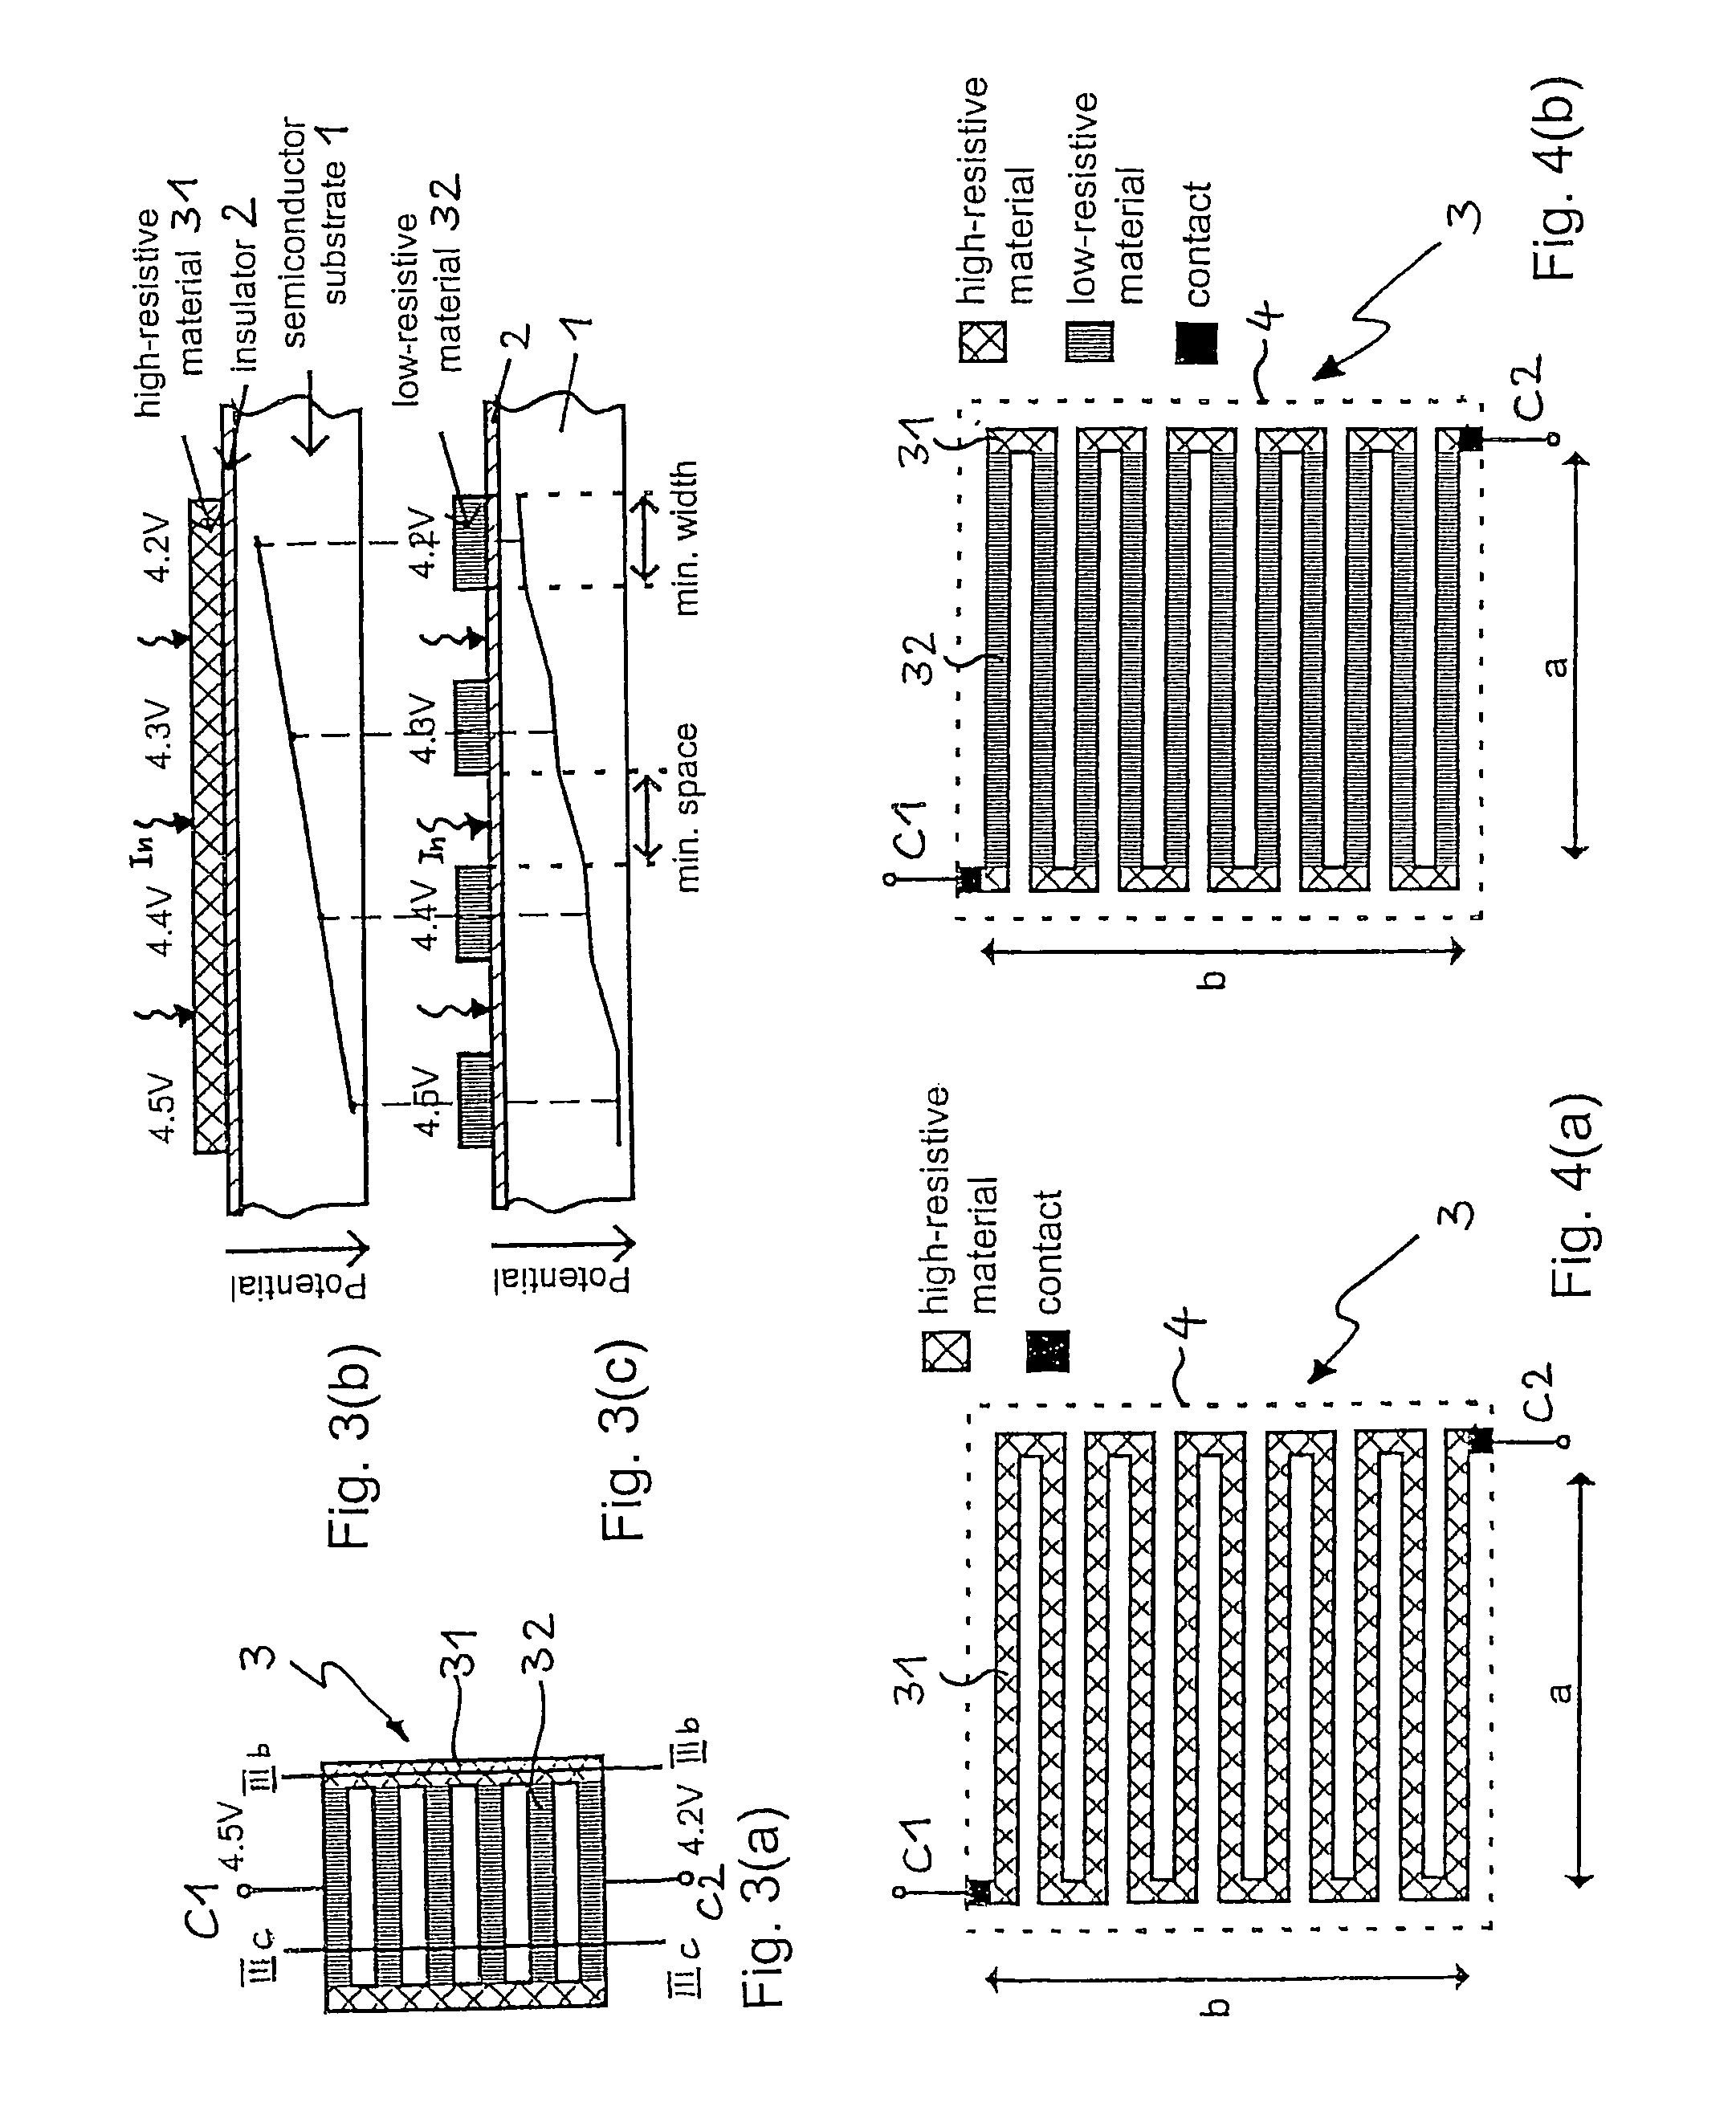 Large-area pixel for use in an image sensor